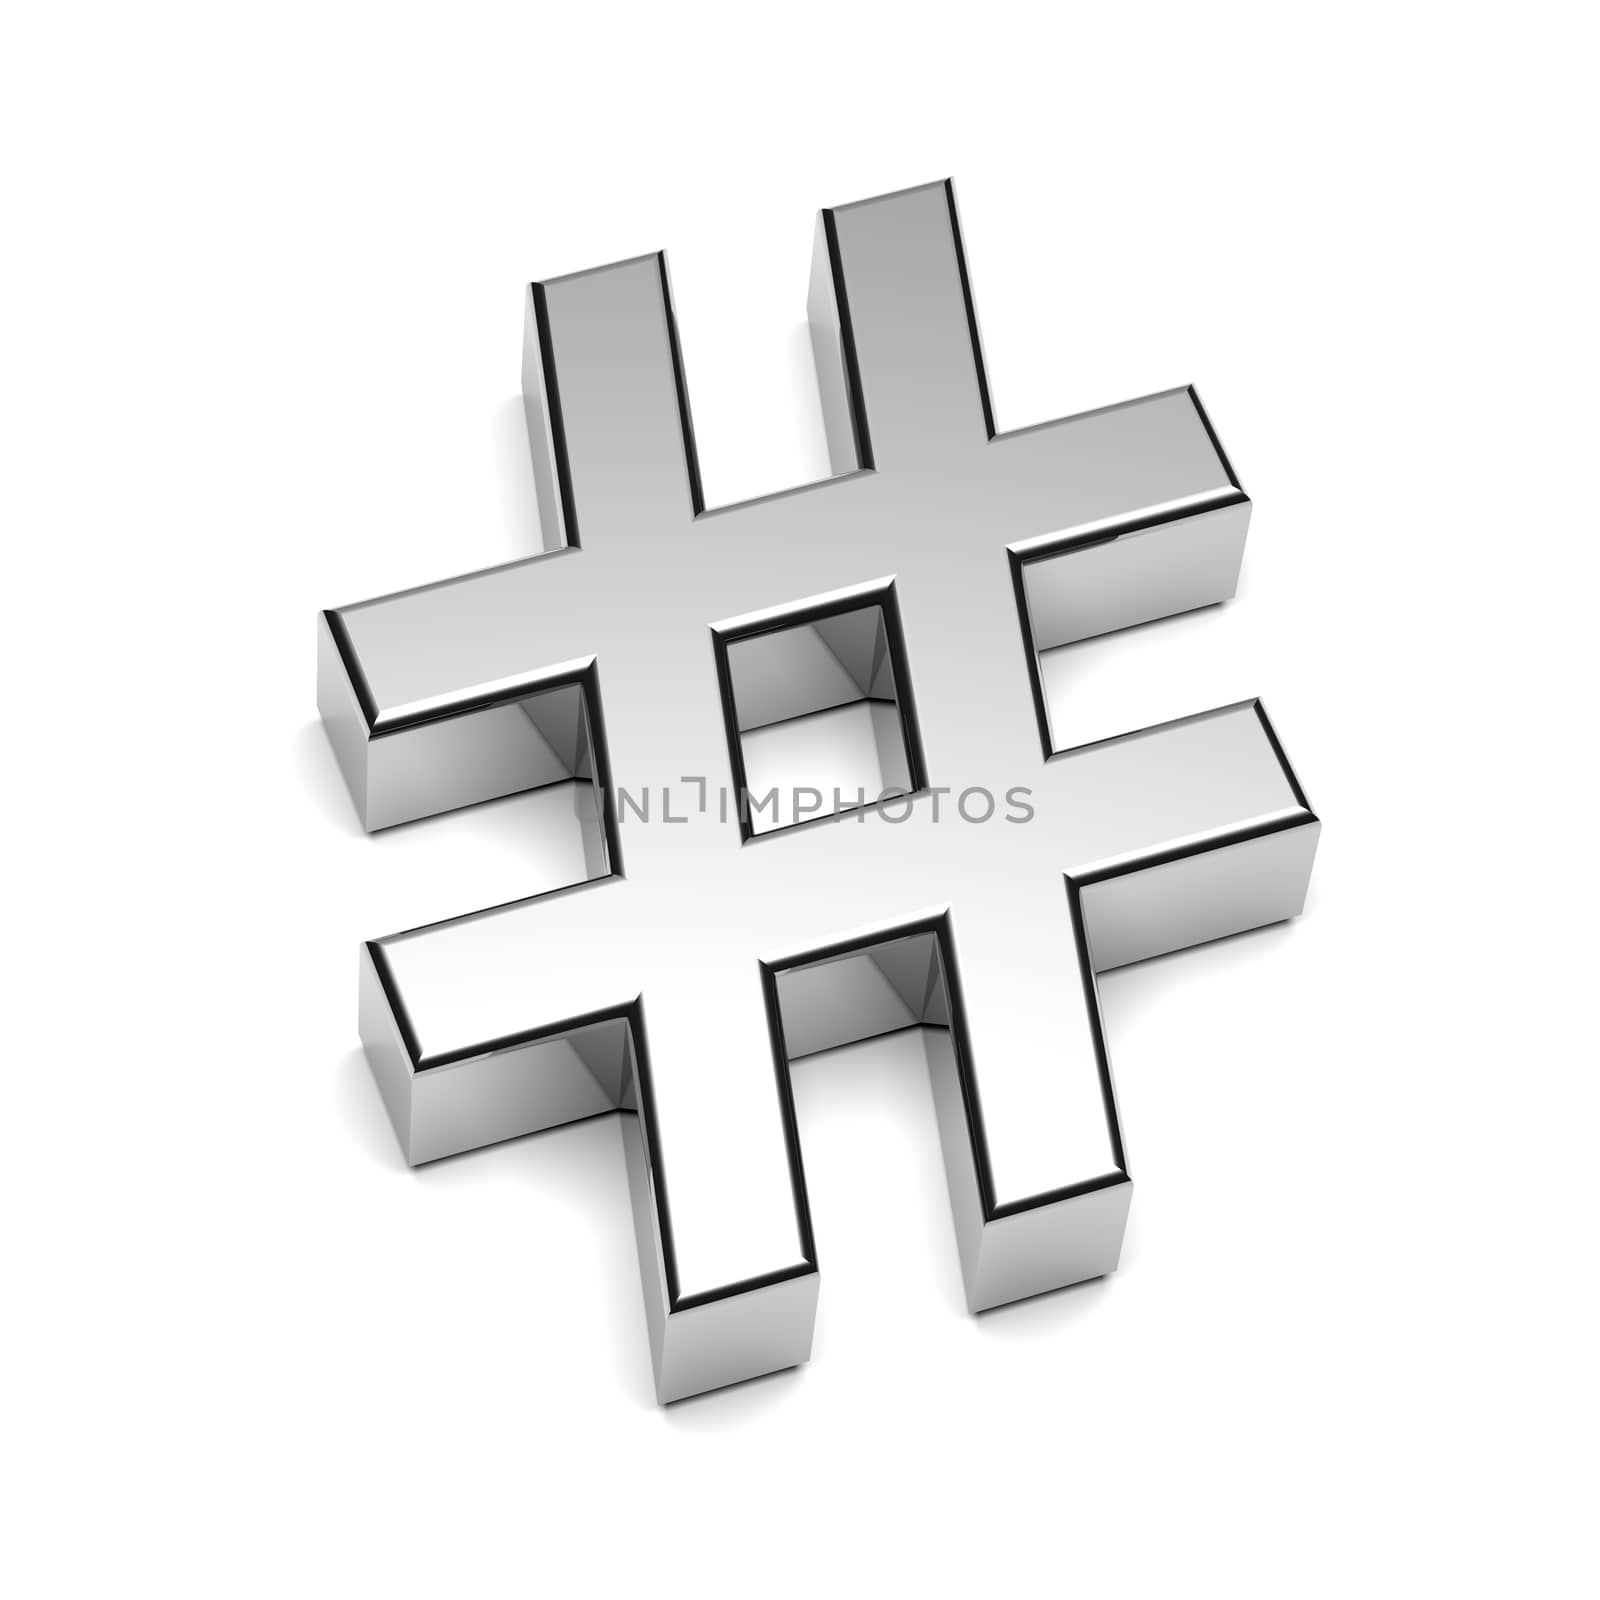 Hashtag Chrome Sign Isolated on White Background with Shadow 3D Illustration